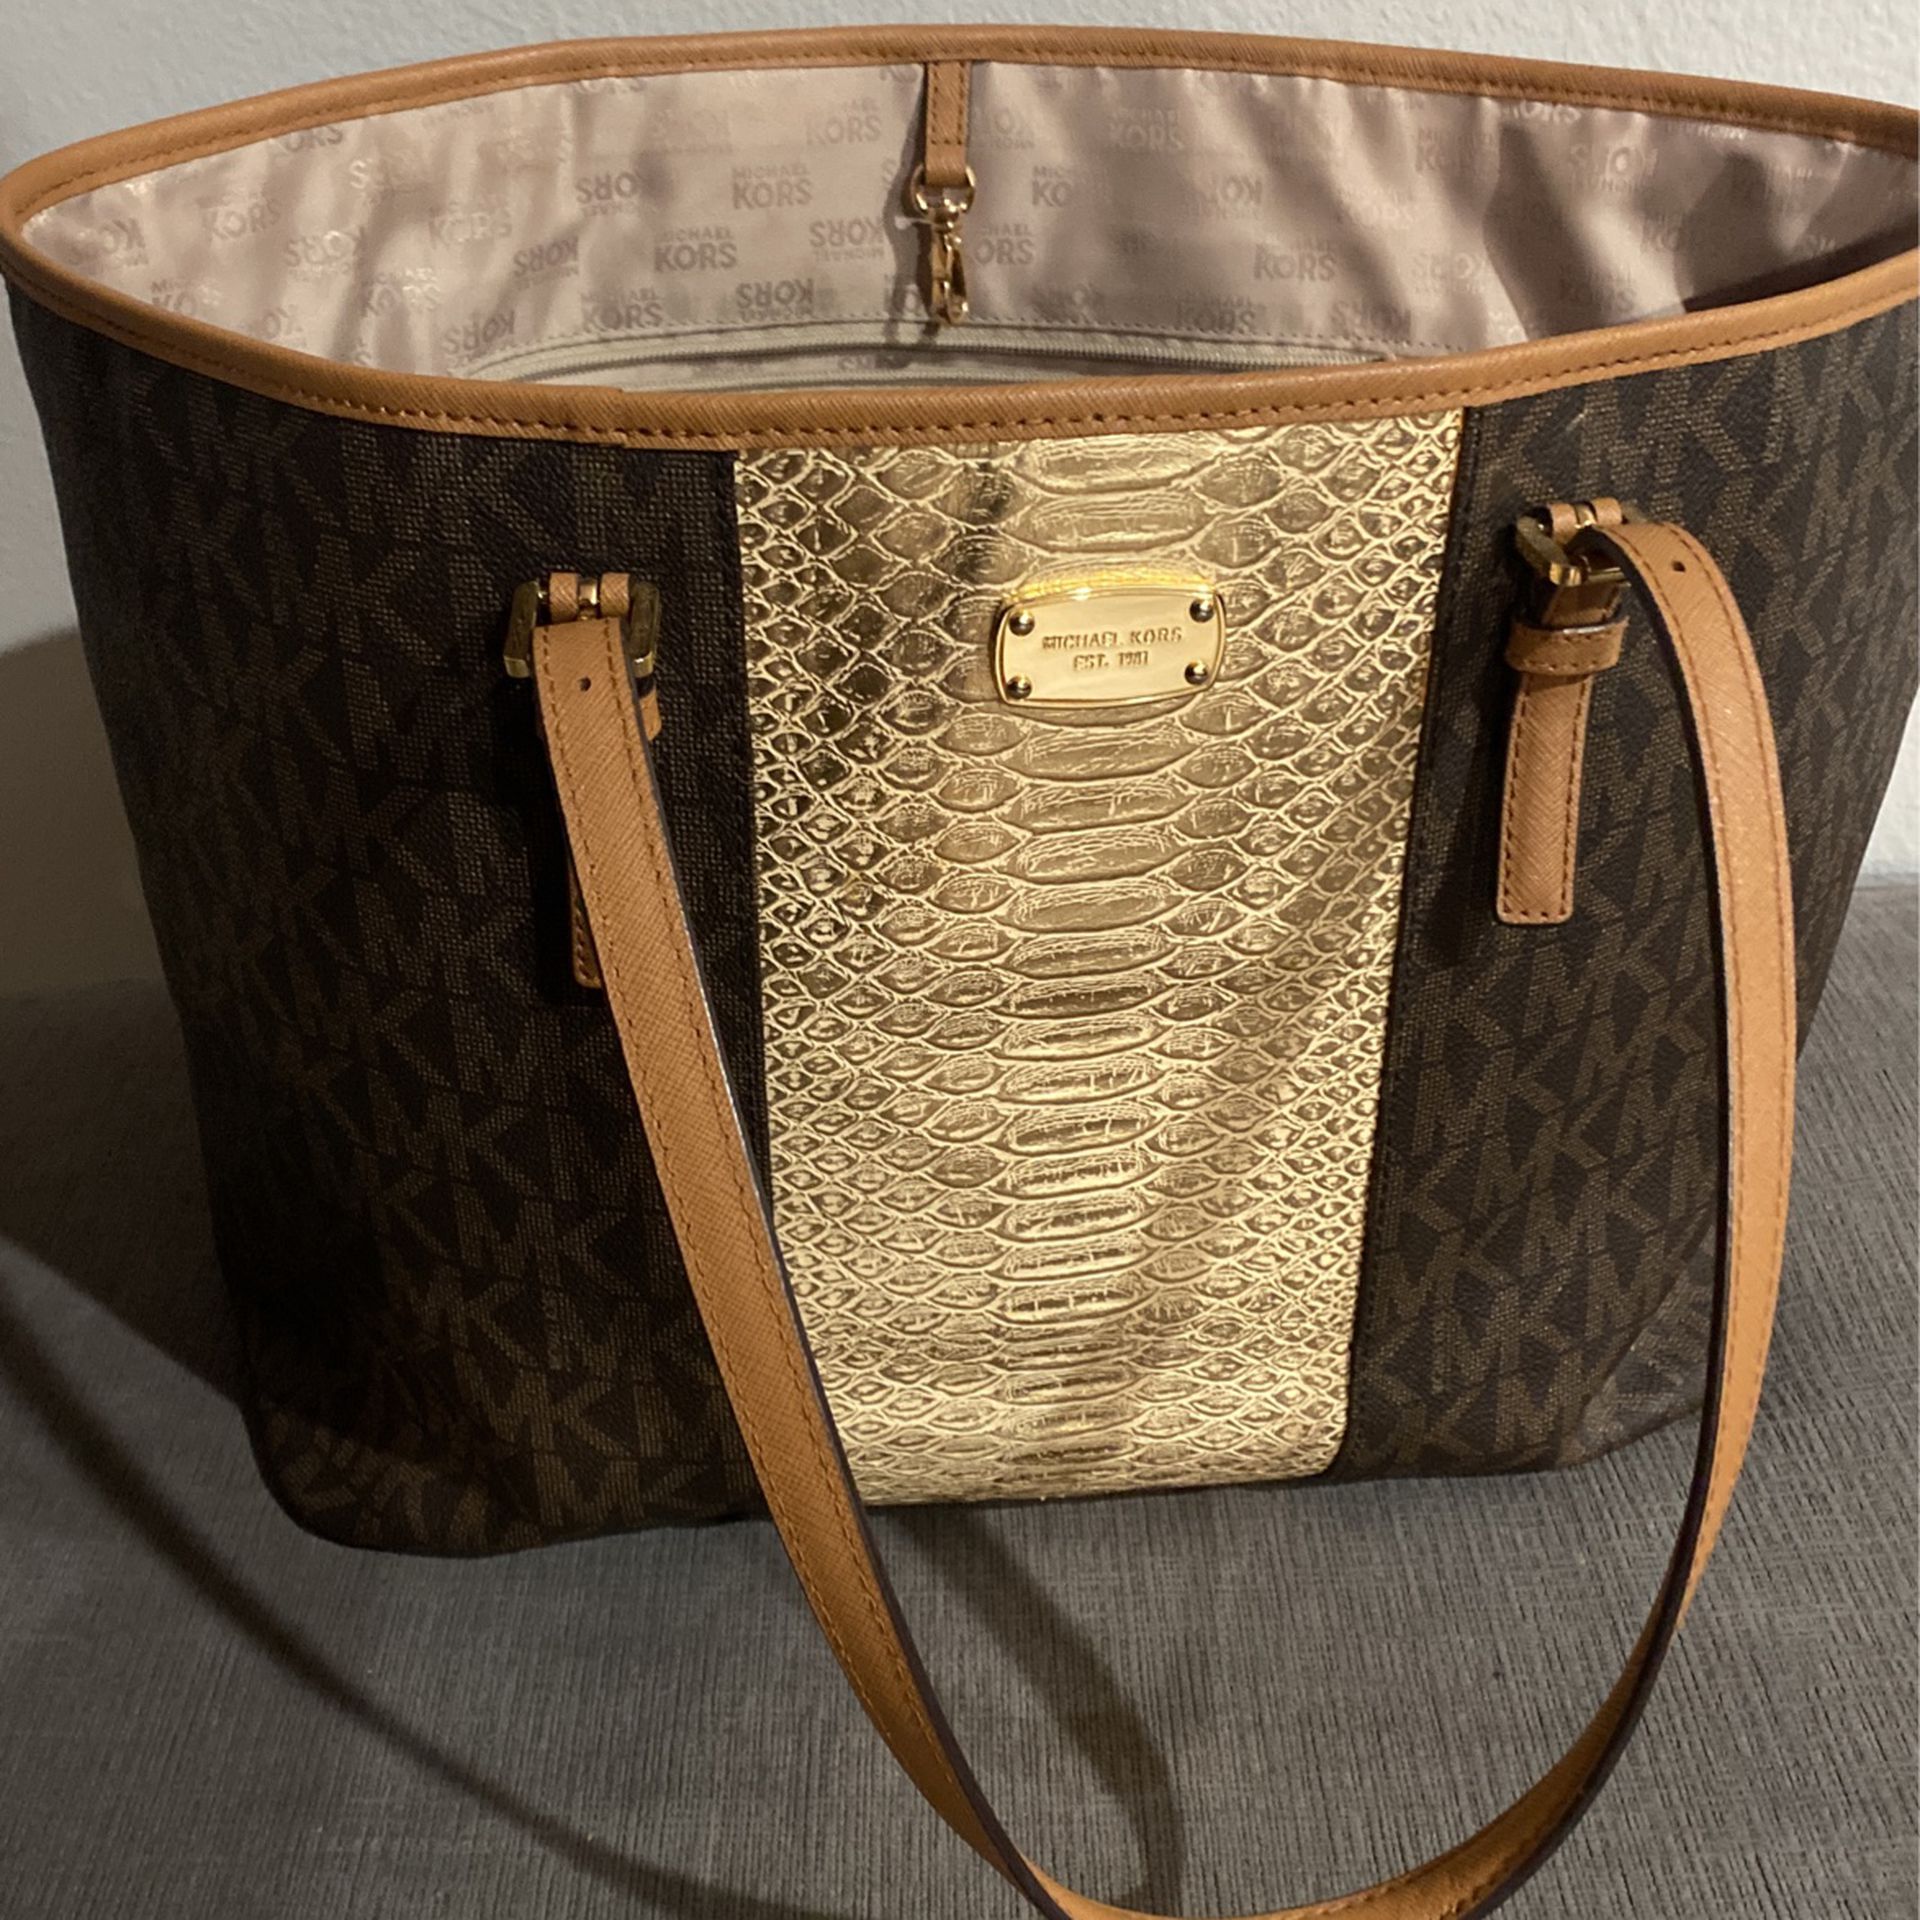 Michael Kors Tote Bag Jet Set Travel Large Carryall Tote Black Leather Gold  for Sale in Rancho Cucamonga, CA - OfferUp